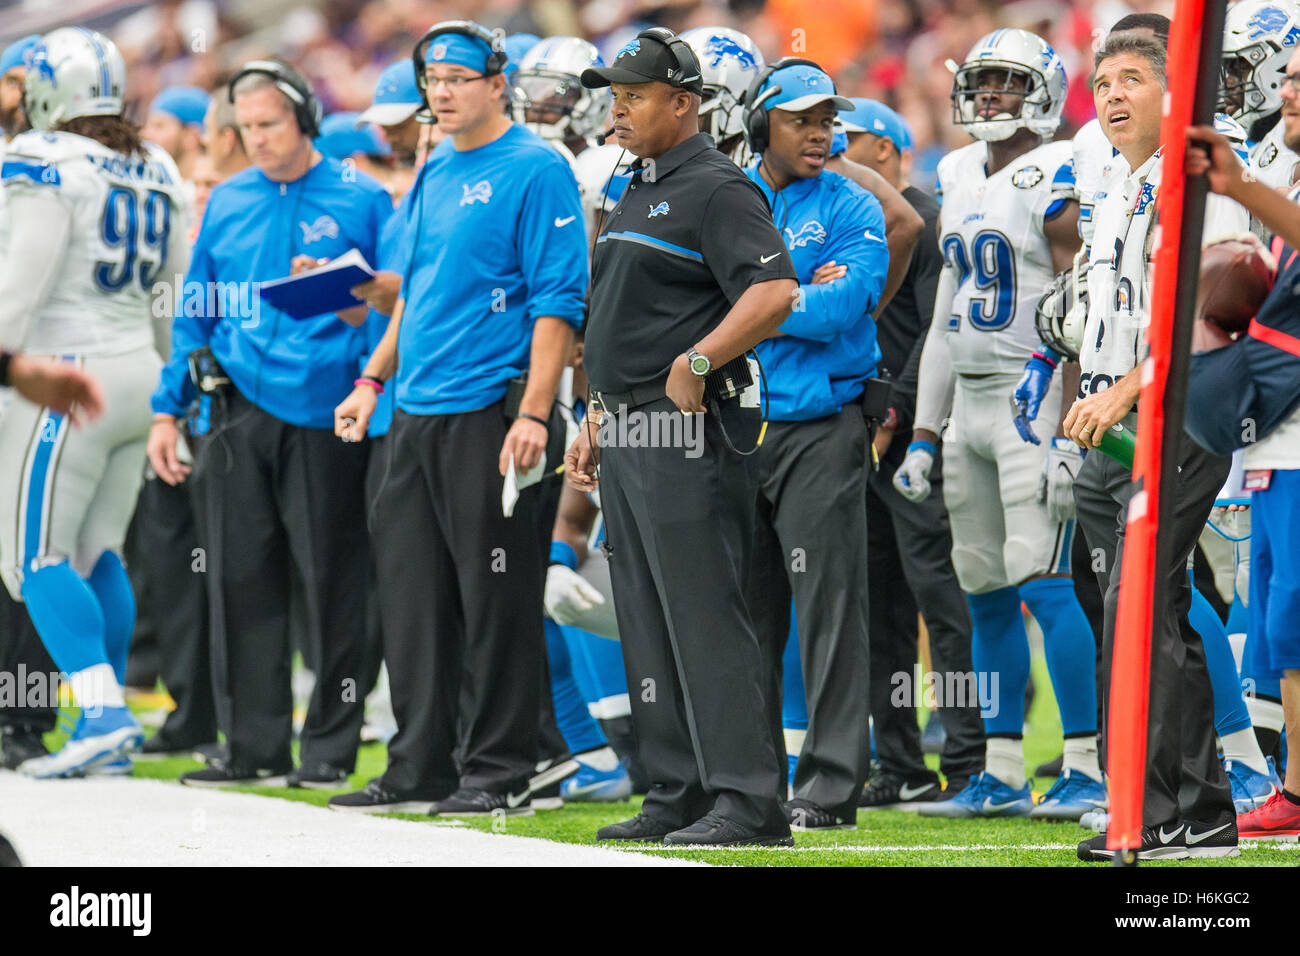 Houston, Texas, USA. 30th Oct, 2016. Detroit Lions head coach Jim Caldwell watches during the 2nd quarter of an NFL game between the Houston Texans and the Detroit Lions at NRG Stadium in Houston, TX on October 30th, 2016. The Texans won the game 20-13. Credit:  Trask Smith/ZUMA Wire/Alamy Live News Stock Photo